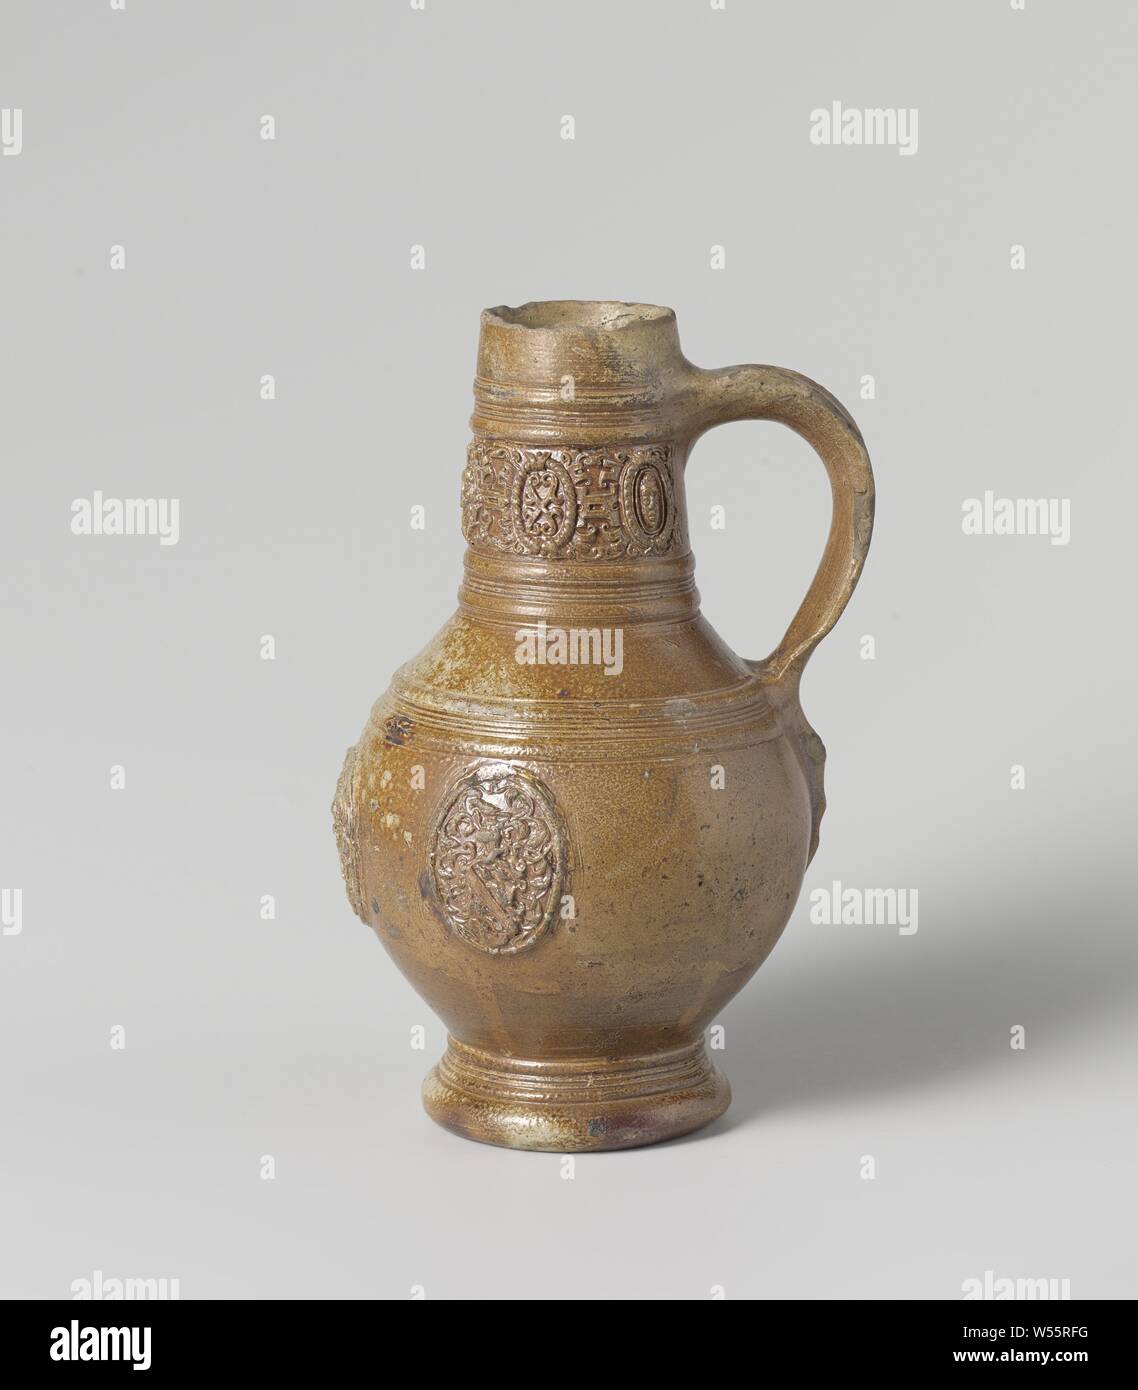 Jug with a coat of arms, Stoneware jug on high feet with a spherical body and long, narrow neck. The C-shaped ear is attached to the neck and shoulder. Profiles on the neck, shoulder and foot. Covered with a brown engobe. On the belly in relief three times a printed and imposed medallion with a weapon surrounded by aisles. On the neck a band of concatenated medallions with masks and surrounded by leaf vines. Raeren., anonymous, Raeren, c. 1550 - c. 1599, stoneware, glaze, engobe, vitrification, h 19.2 cm d 4.5 cm d 11.3 cm d 7.4 cm w 12.7 cm Stock Photo